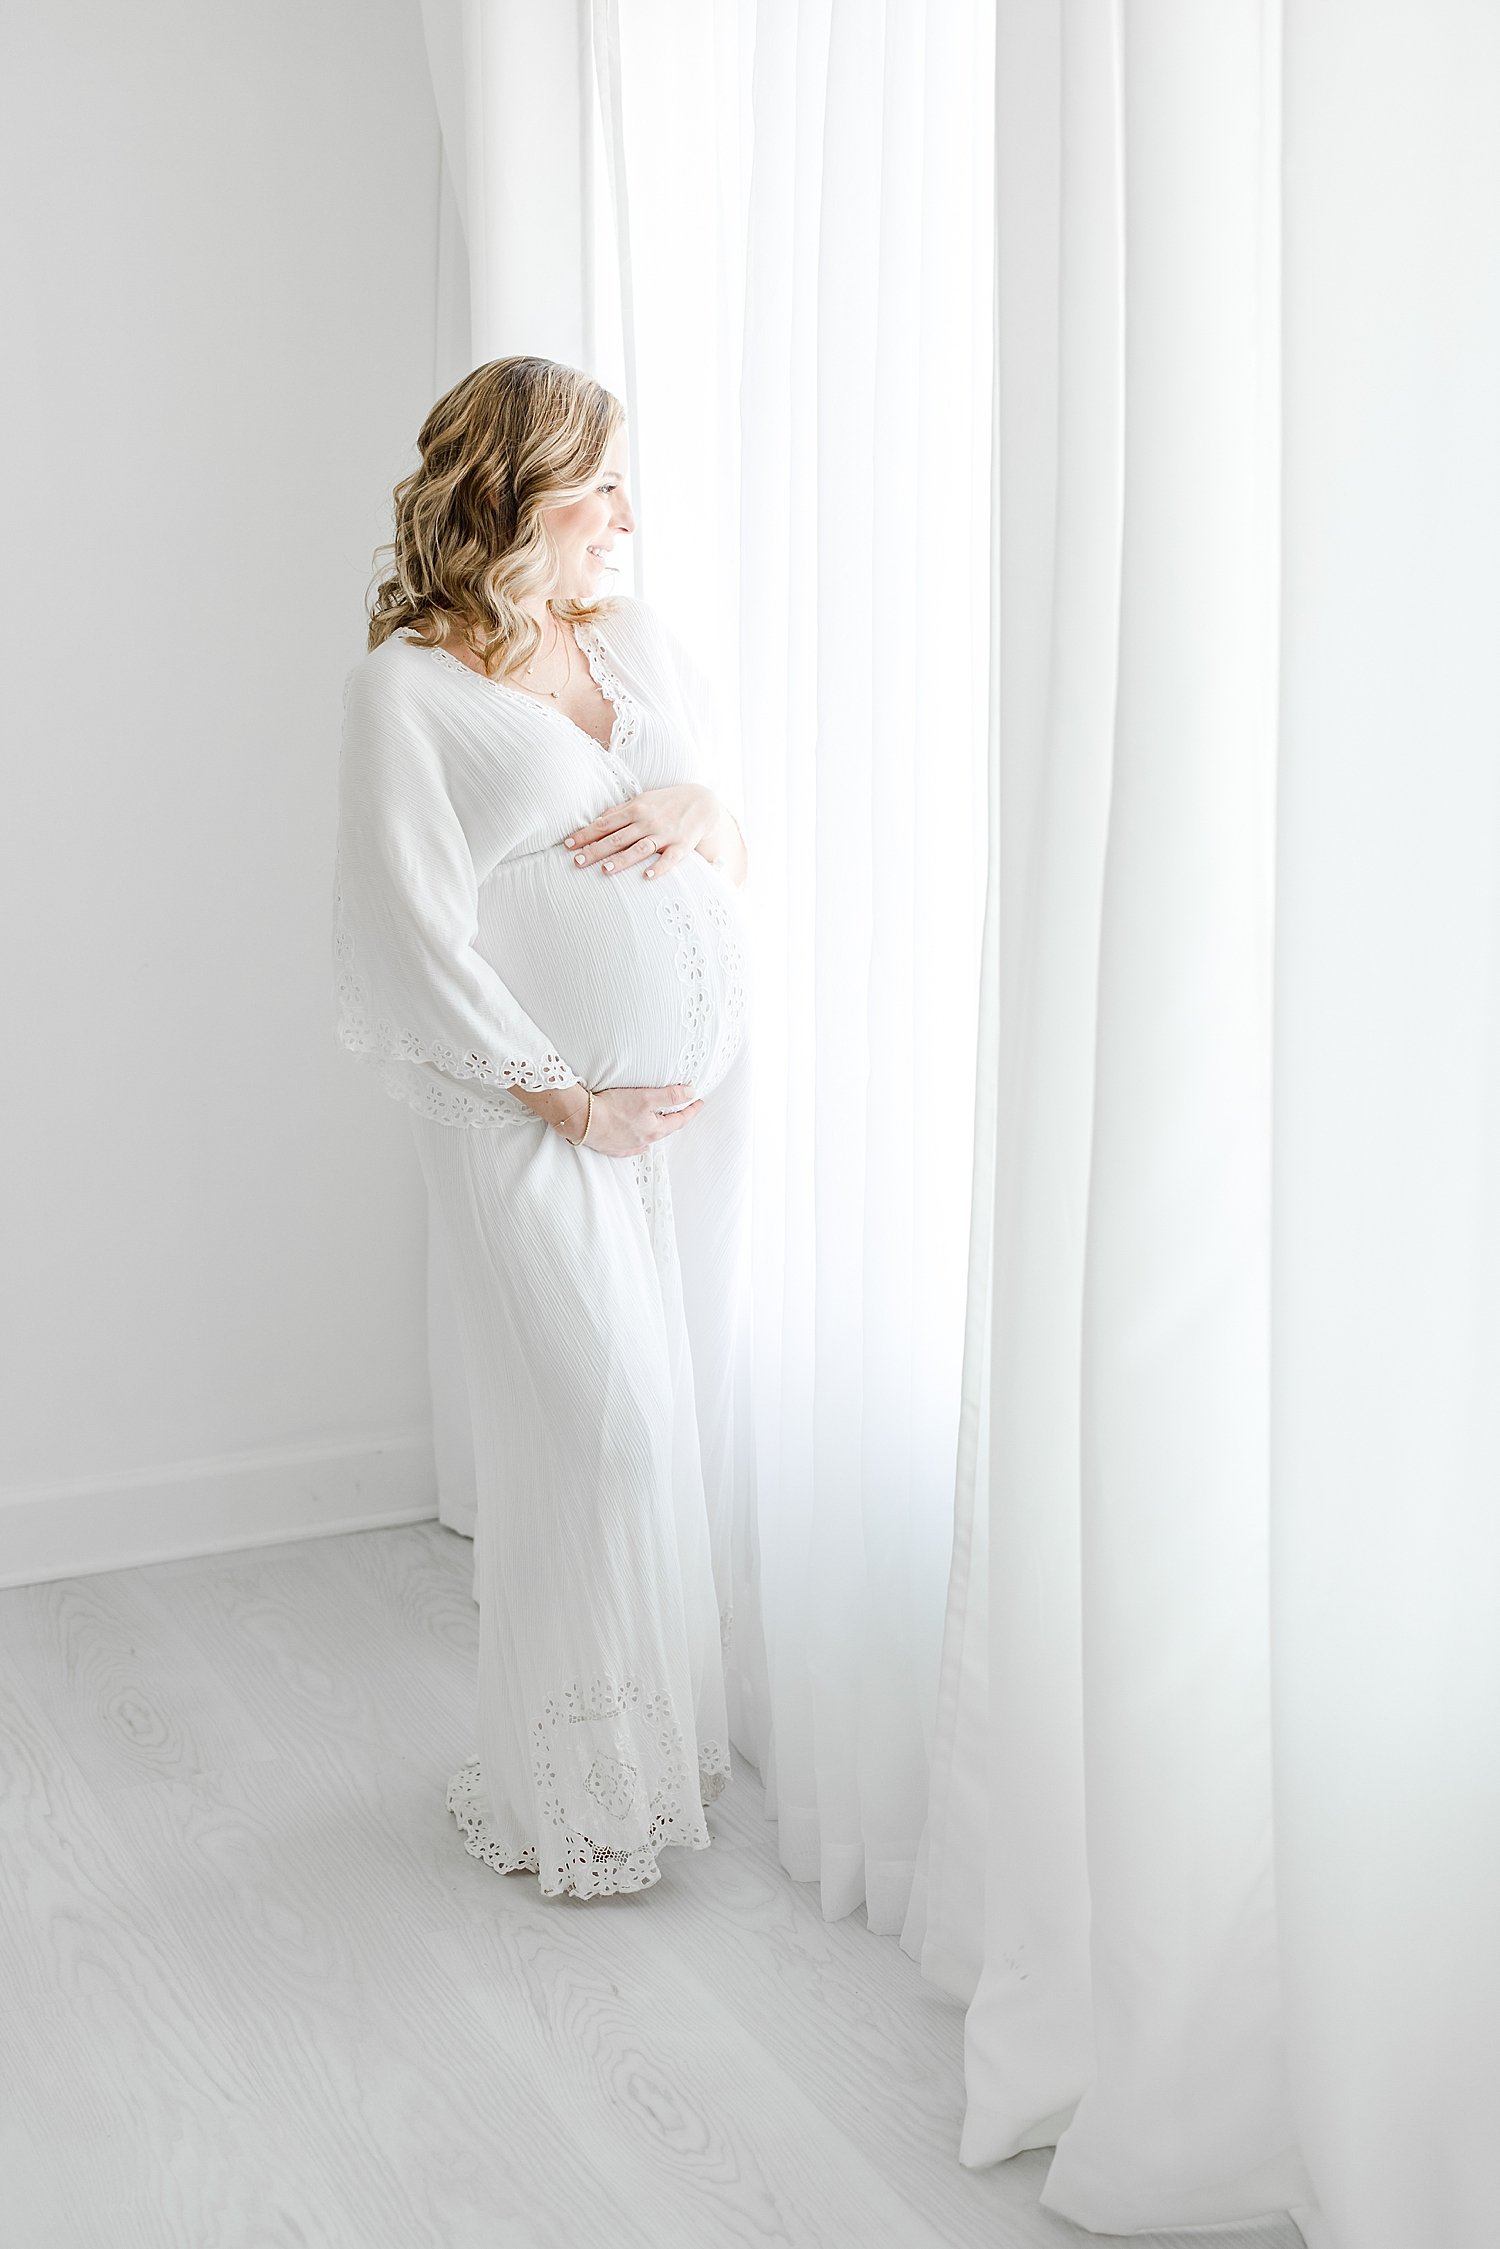 Mom looking out window during maternity session | Kristin Wood Photography